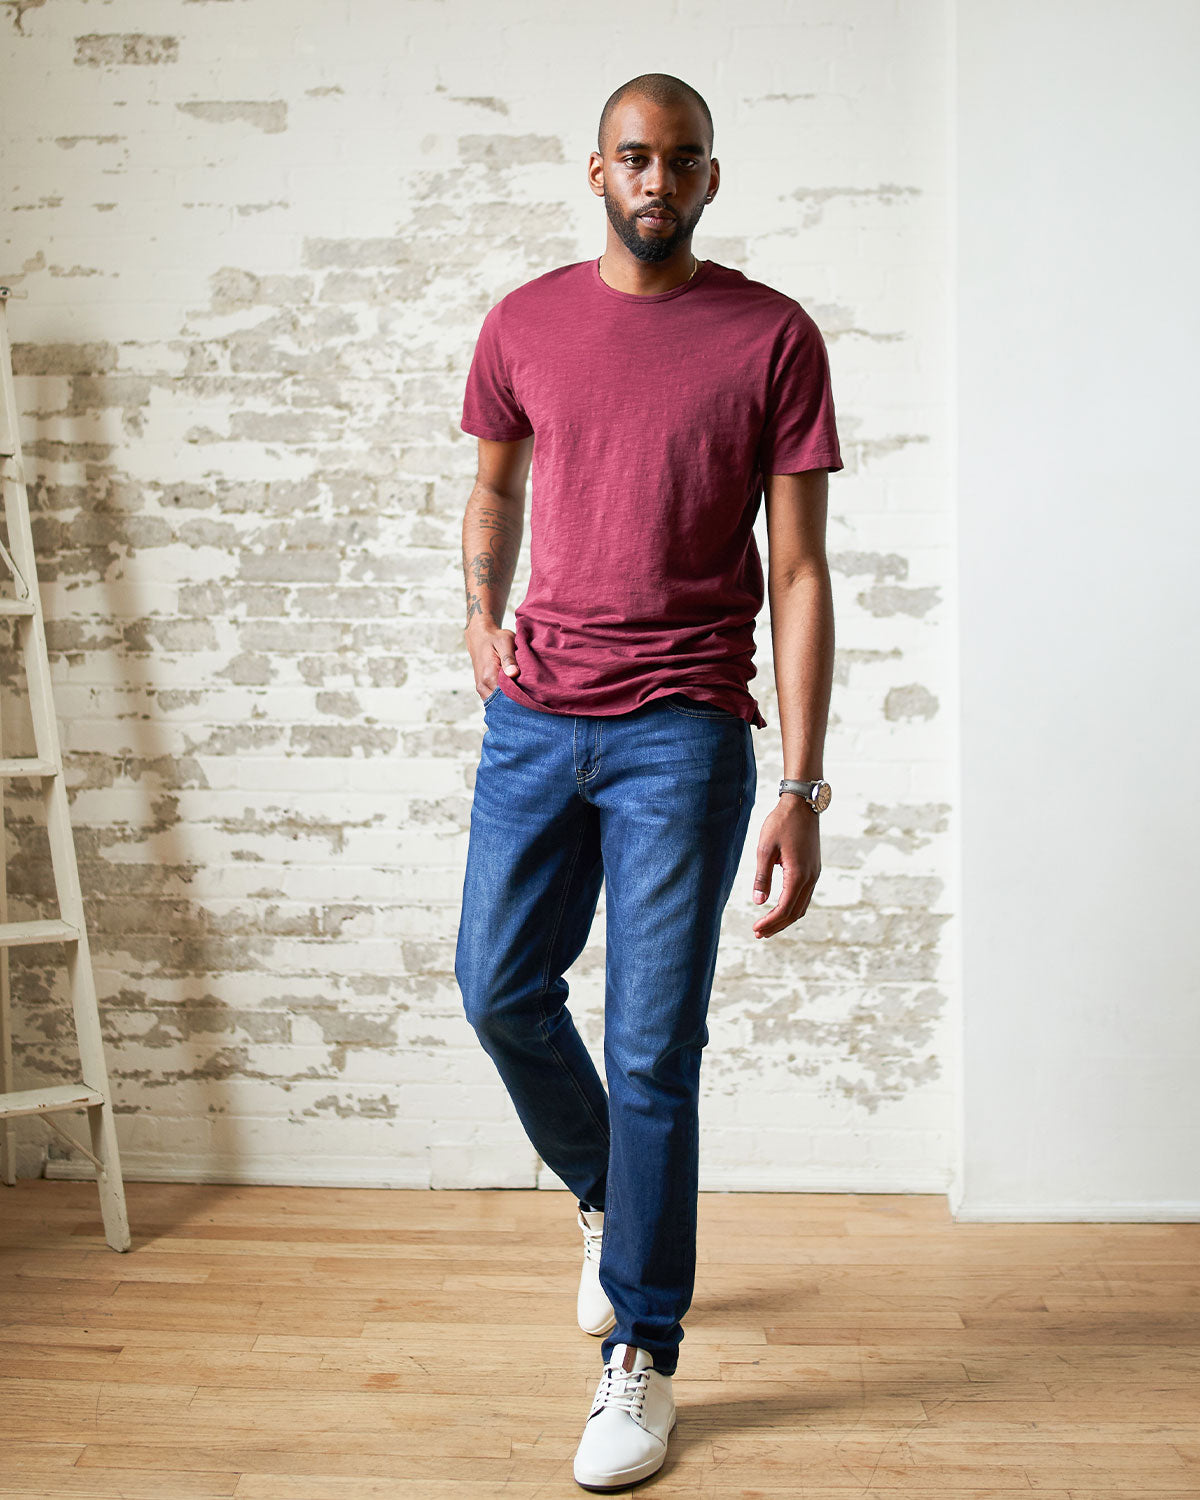 Sizing Jeans for Tall Men - Finding the Best Tall Men's Clothing ...